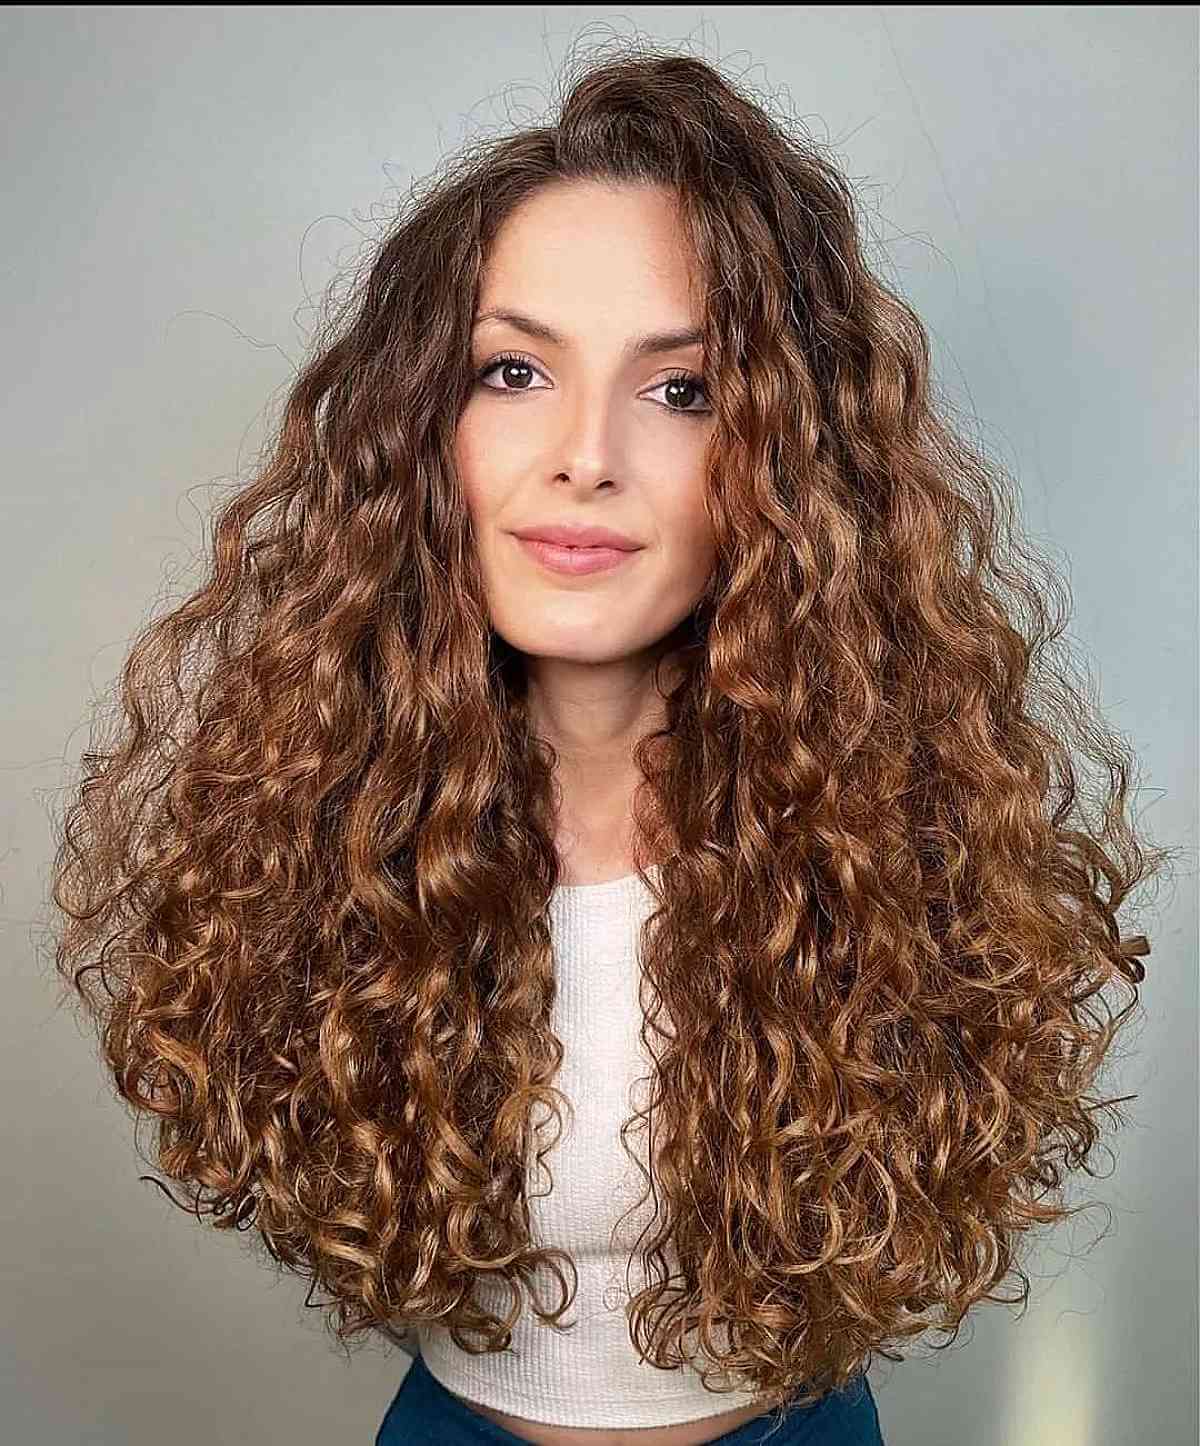 54 Curly Hairstyles for Long Hair to Look Naturally Amazing